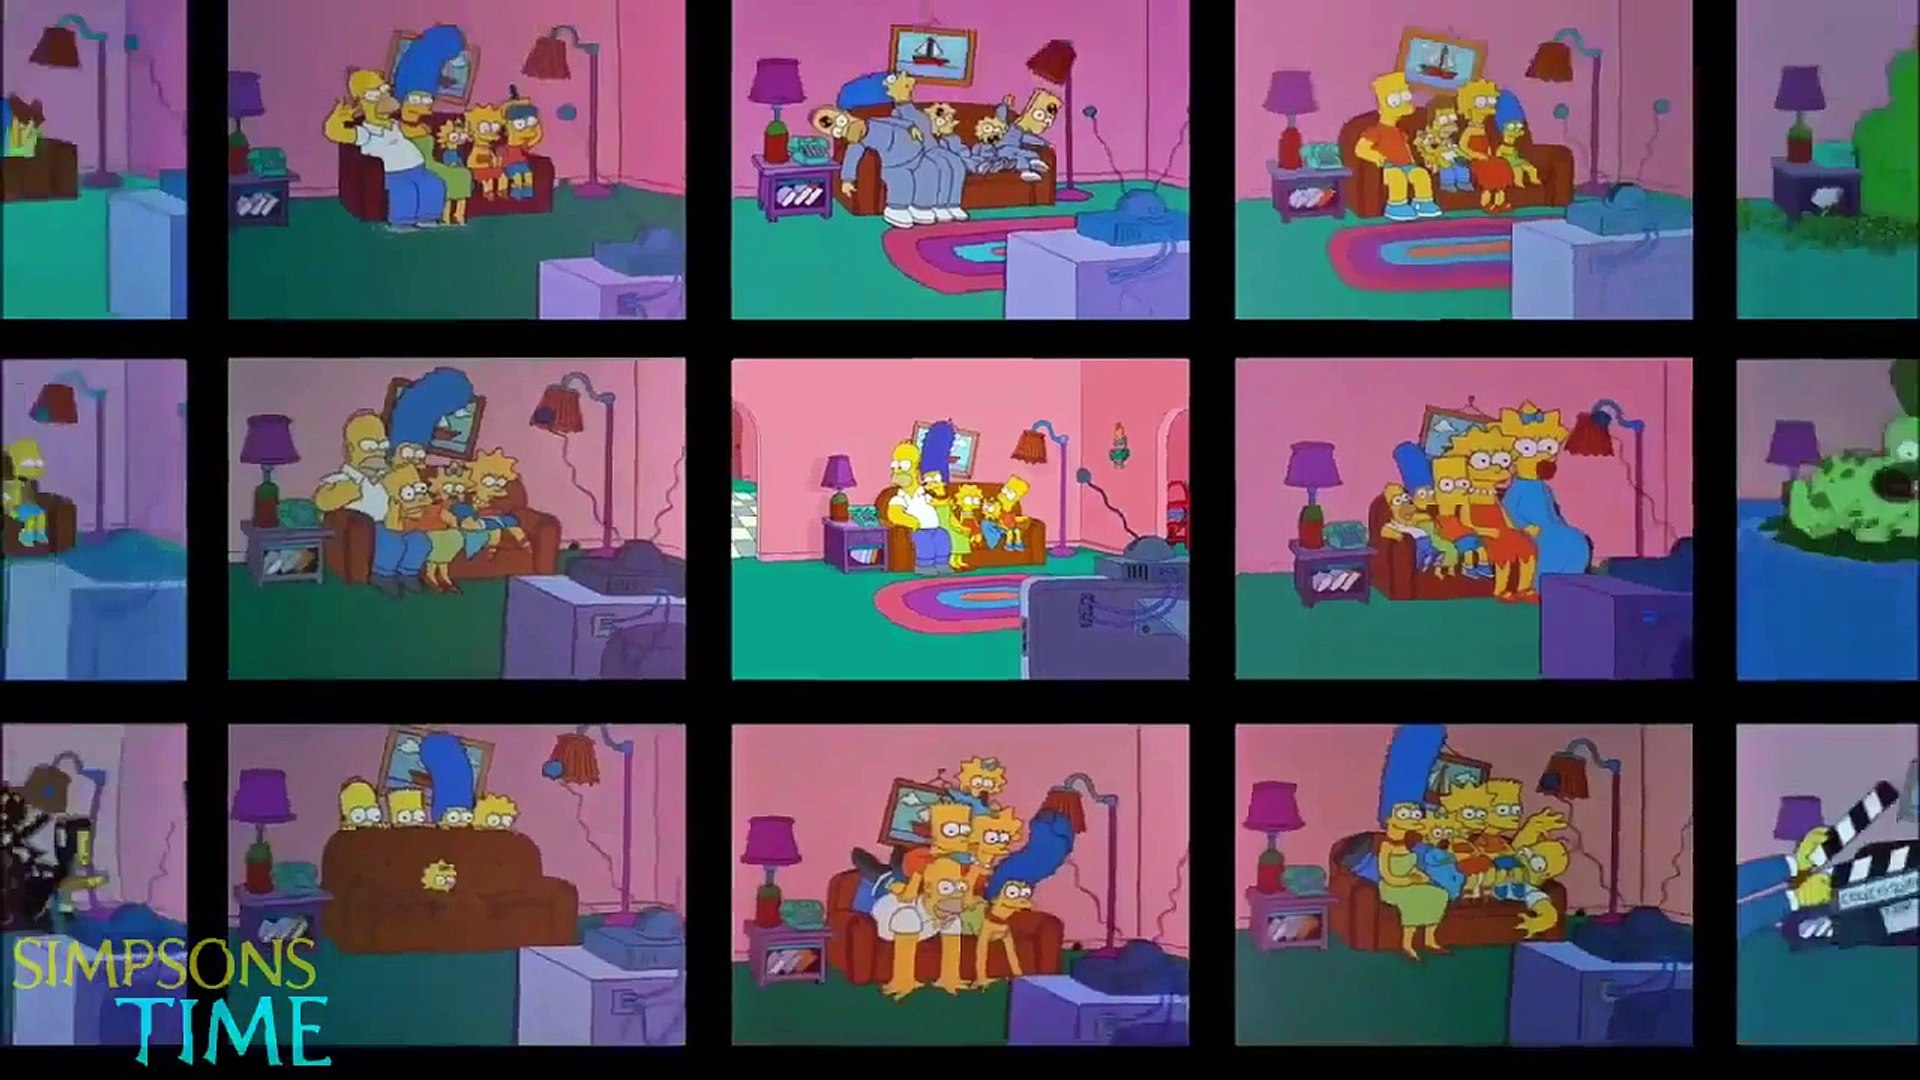 The Simpsons by The Simpsons - Dailymotion